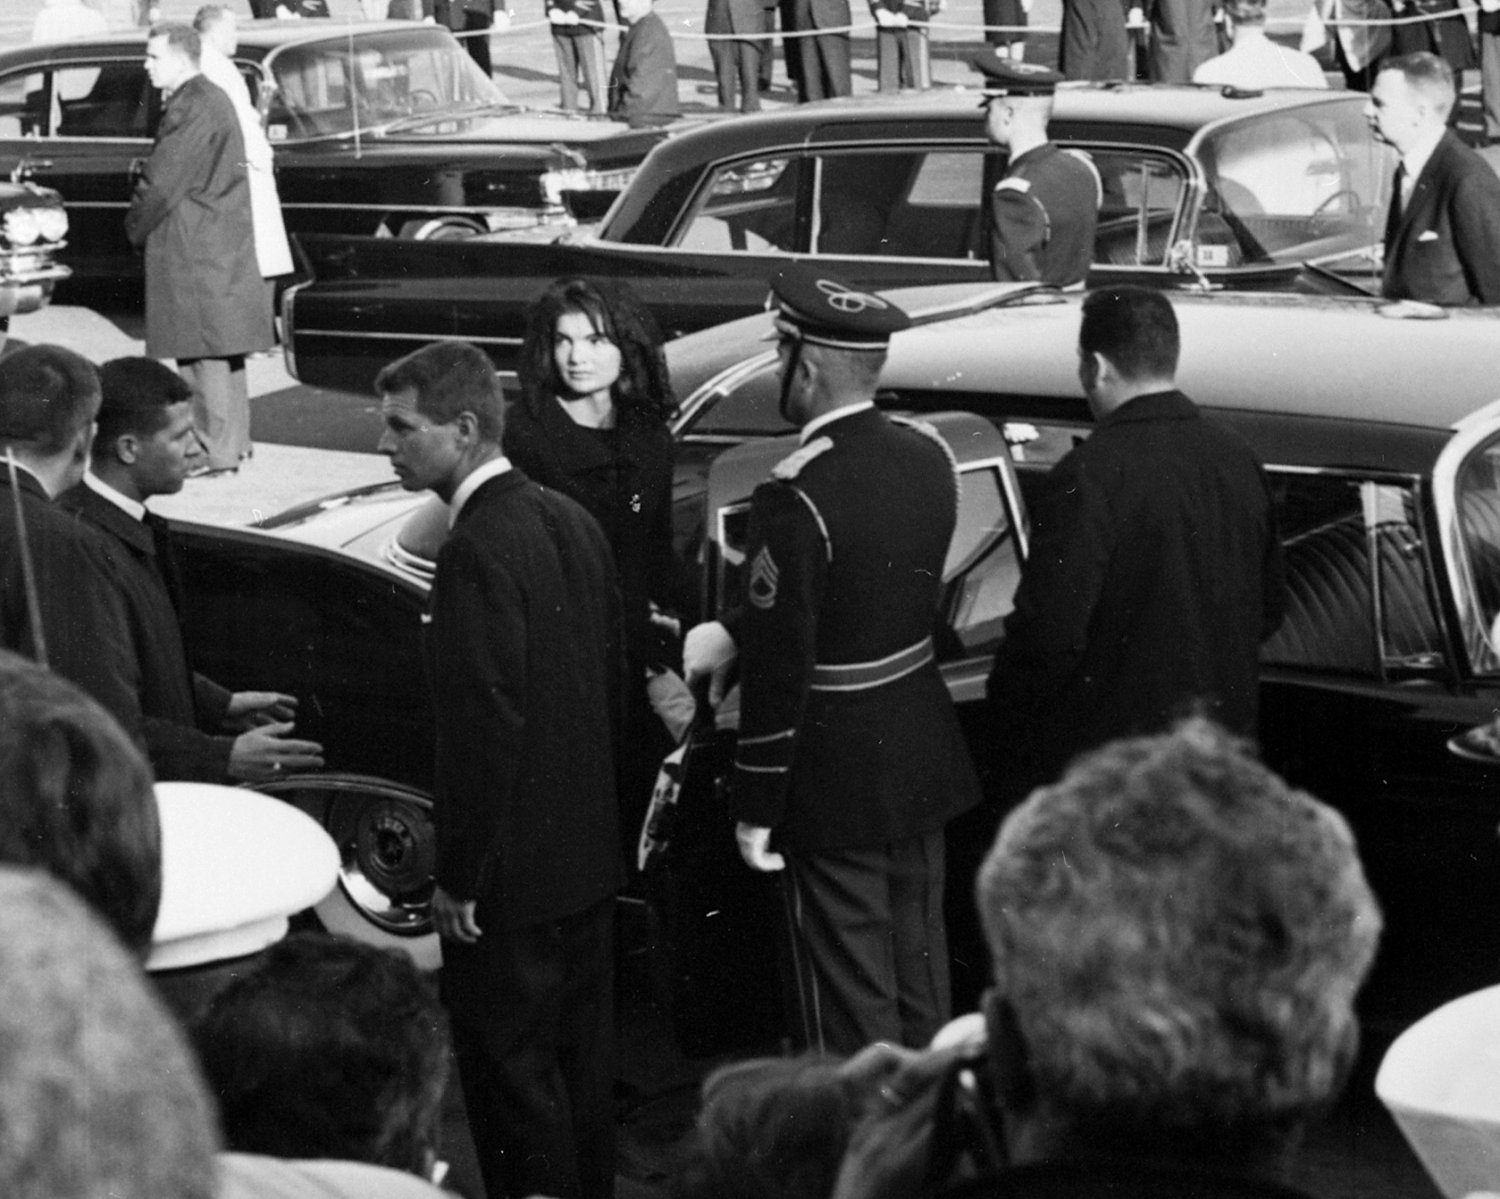 JACKIE & BOBBY KENNEDY ENTER LIMO AT JFK STATE FUNERAL 8X10 PHOTO (EP-934)